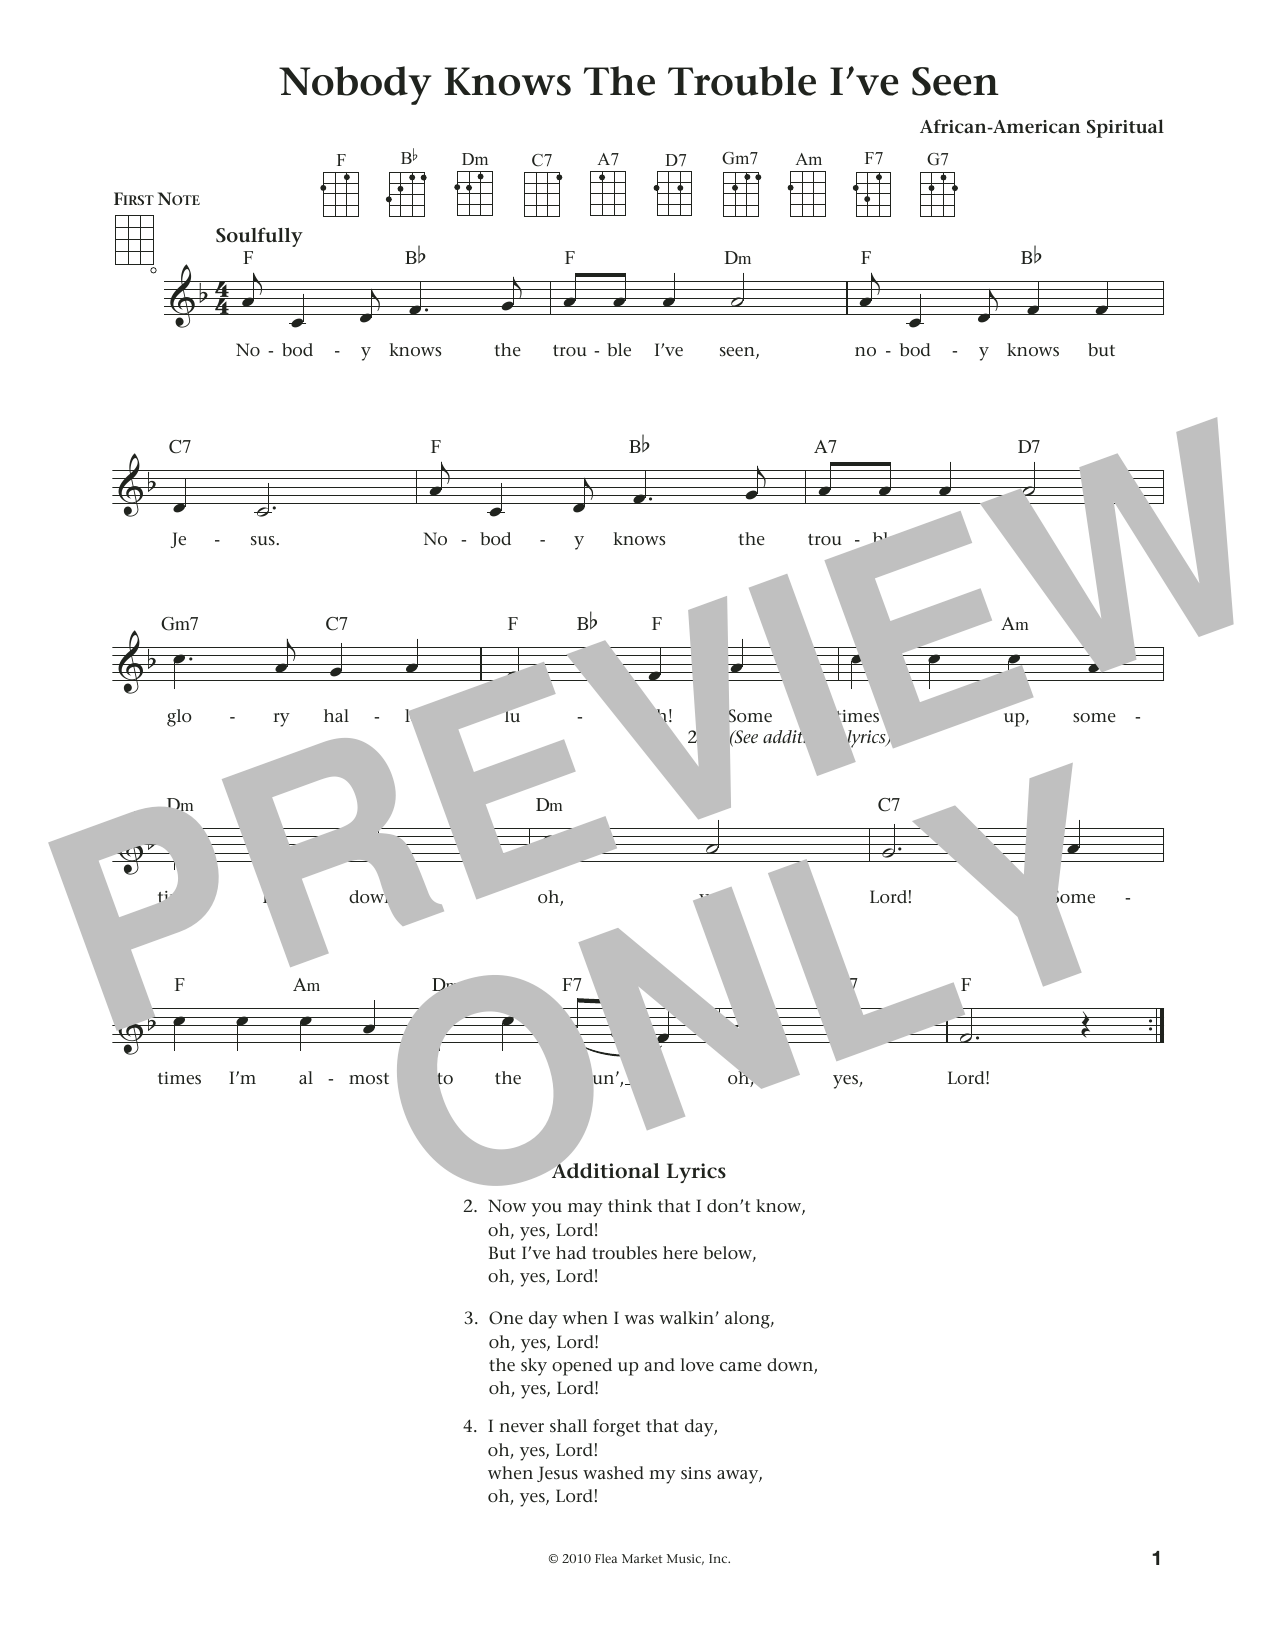 Download African-American Spiritual Nobody Knows The Trouble I've Seen (fro Sheet Music